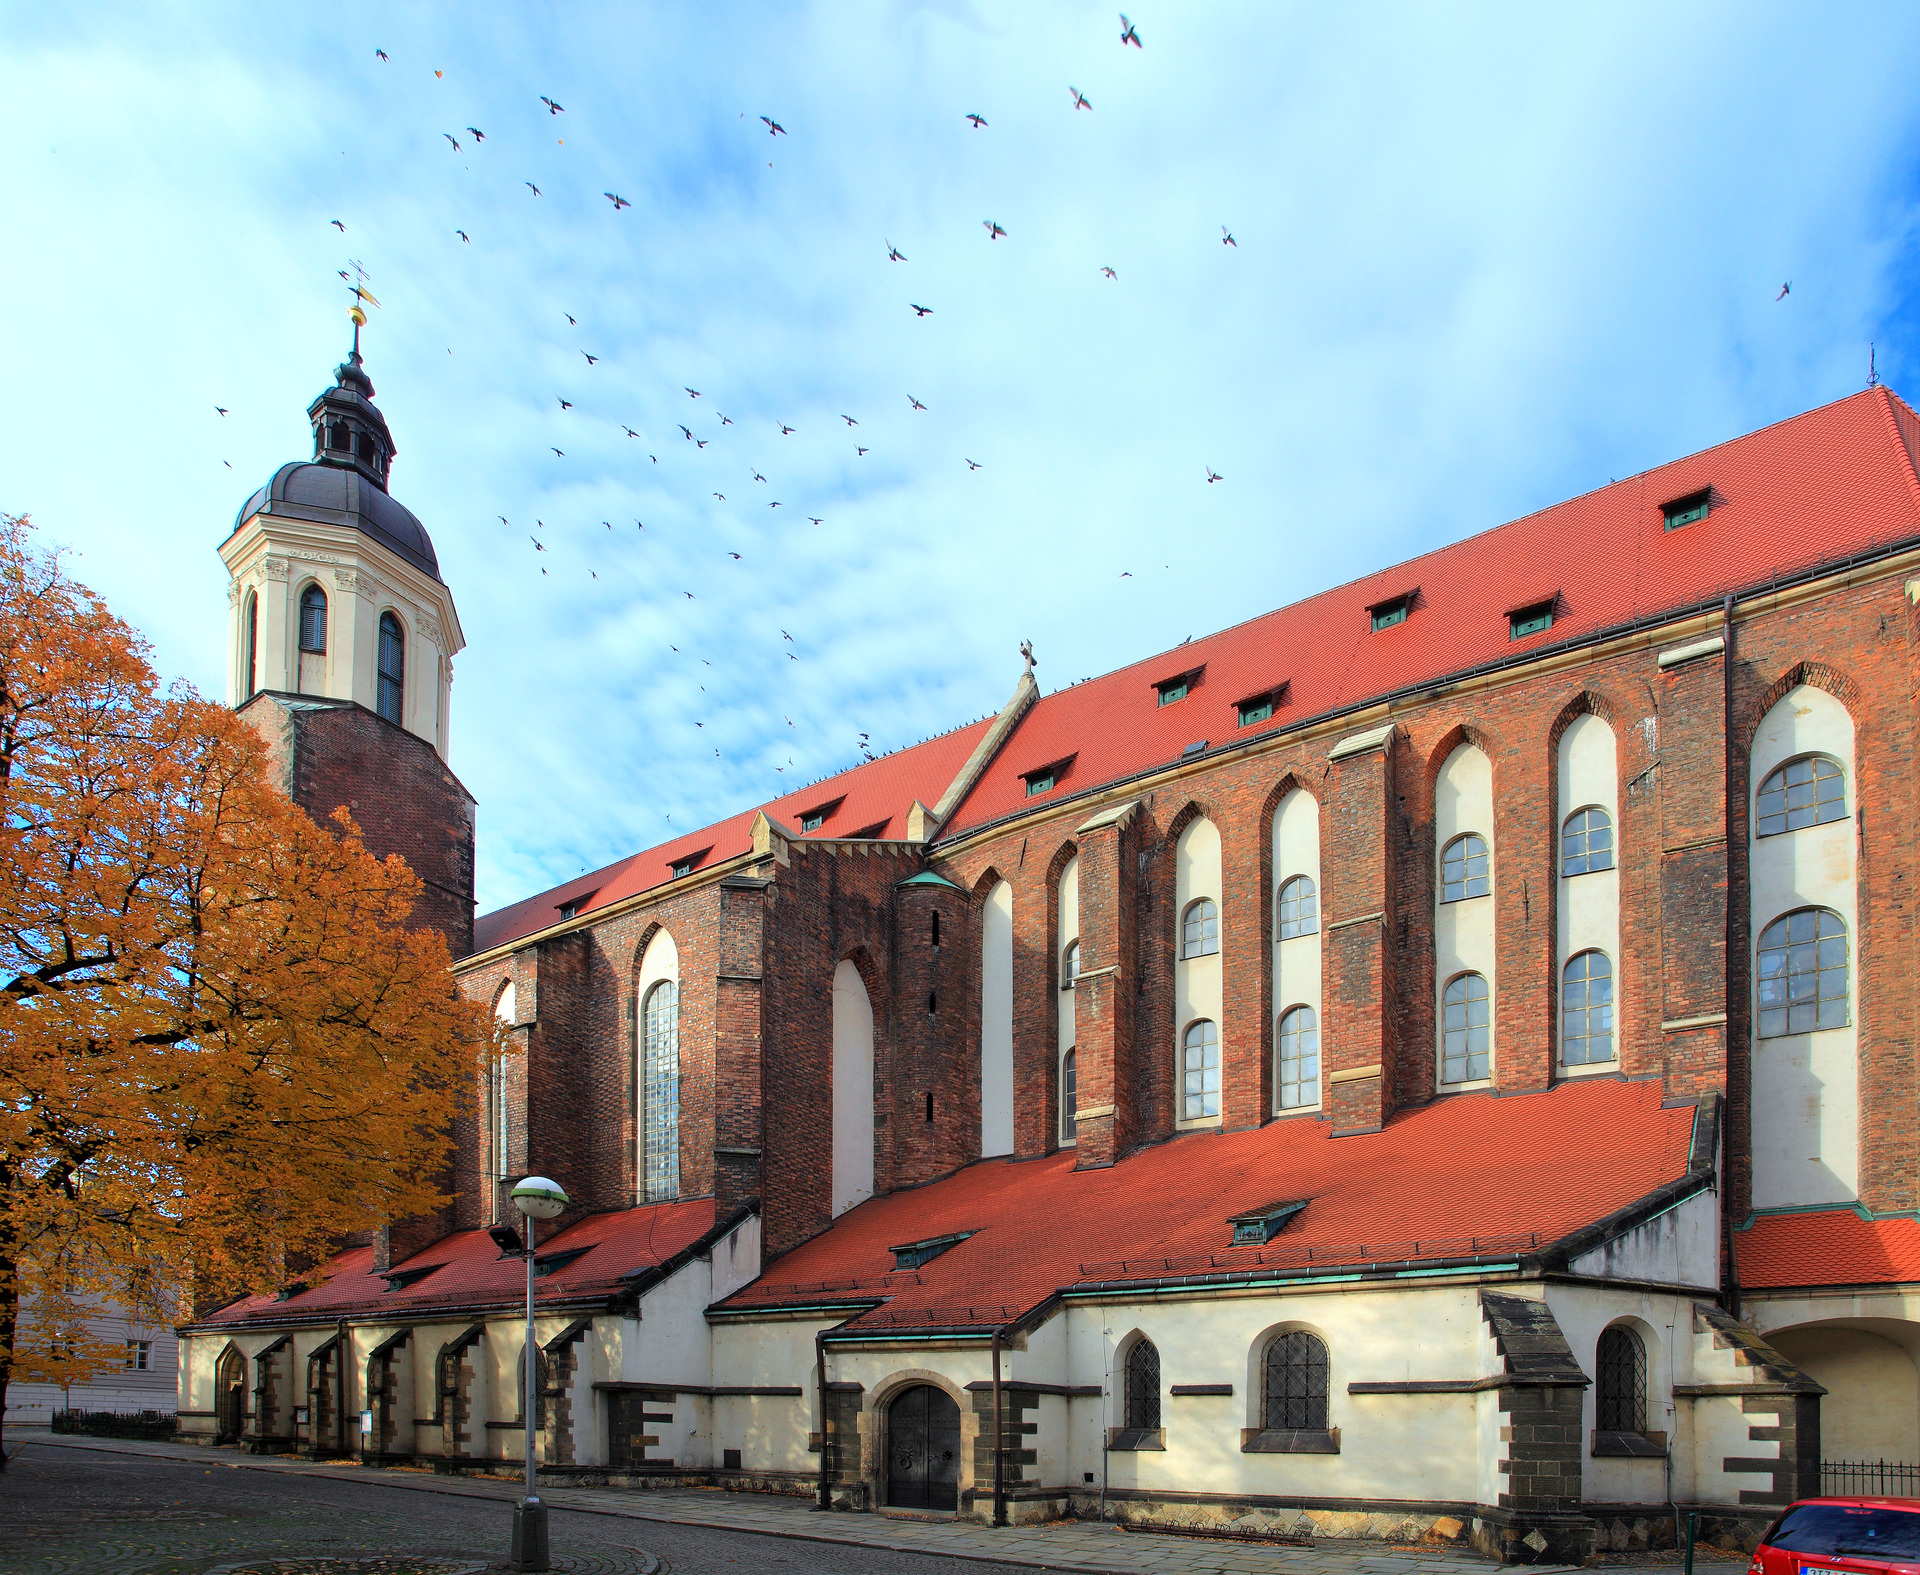 The Co-Cathedral of the Assumption of the Virgin Mary